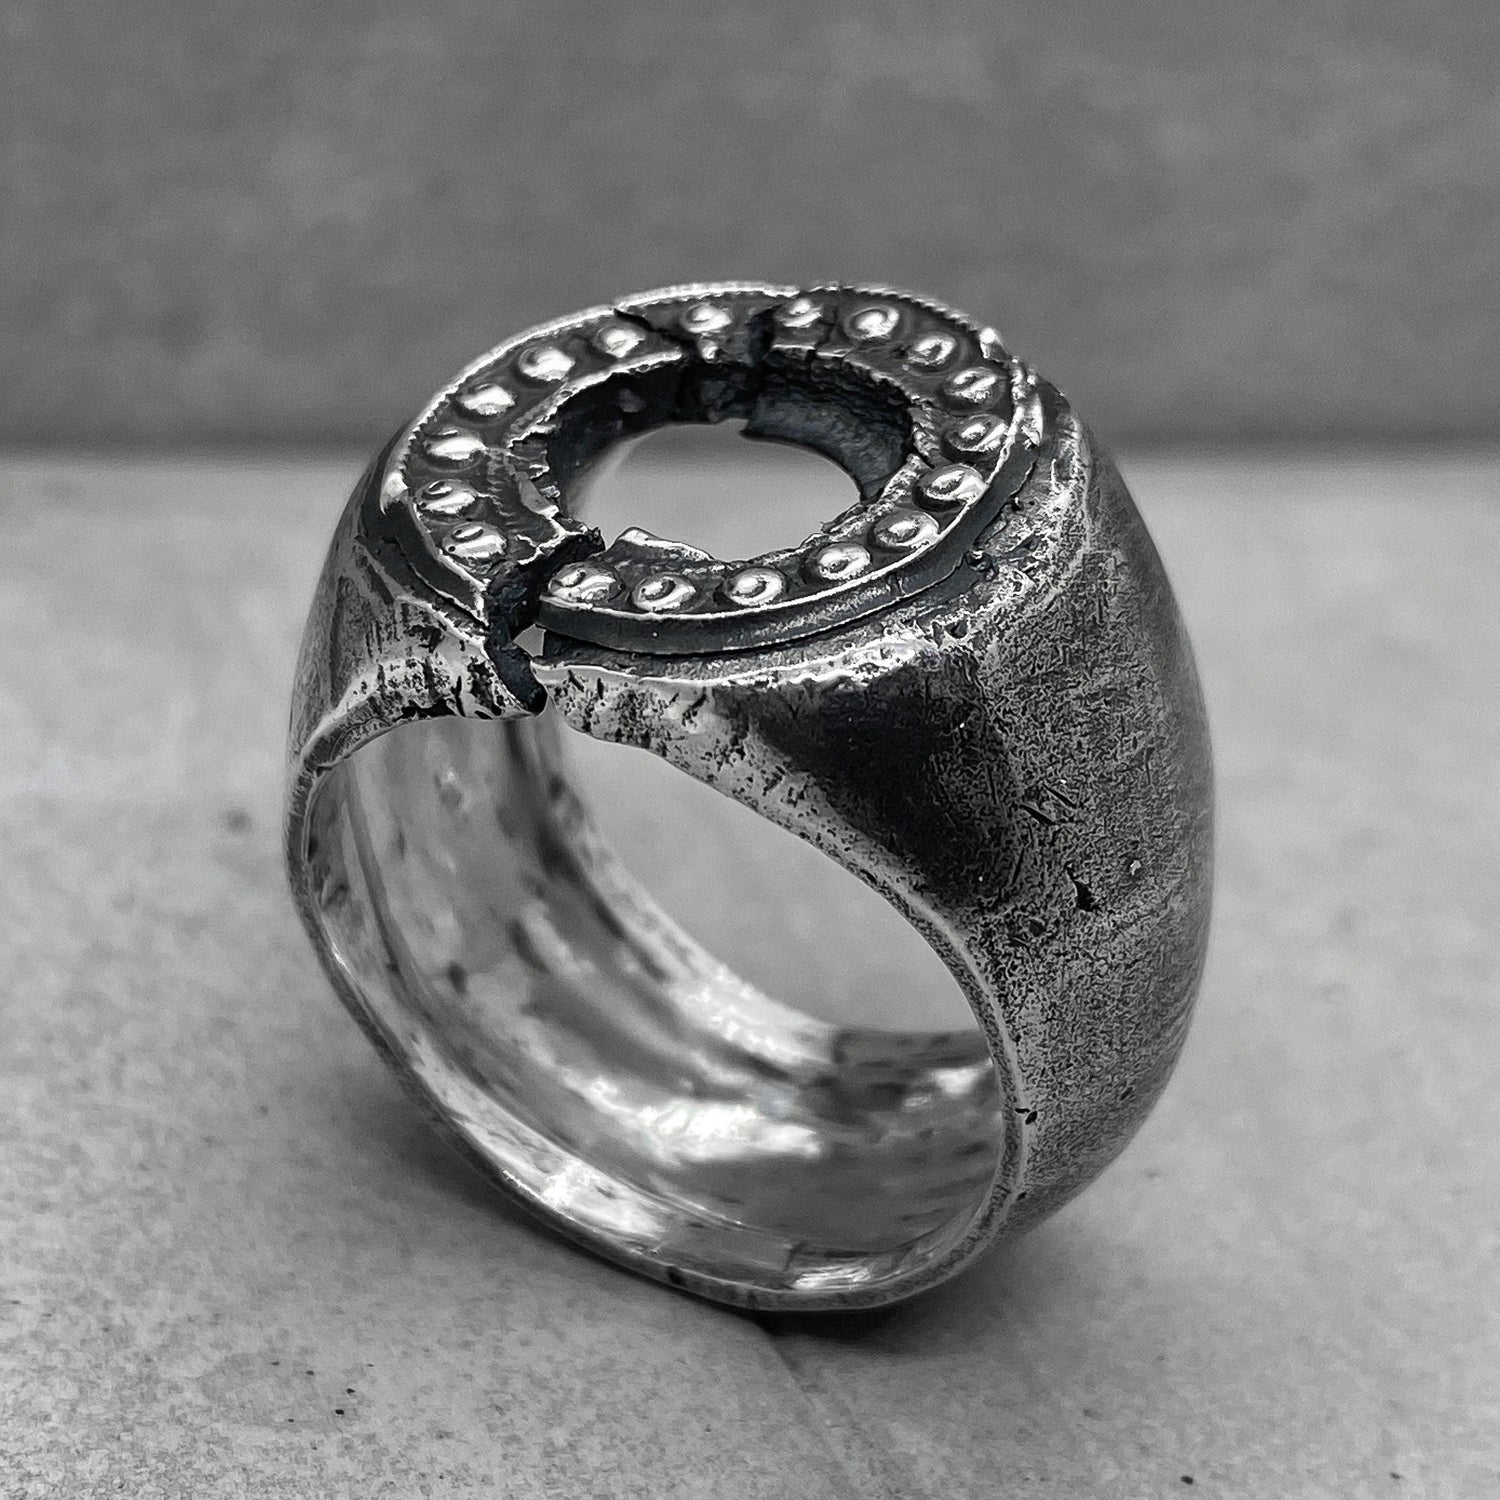 Portal ring- unusual massive round signet ring with a crack and a hole in the center Unusual rings Project50g 